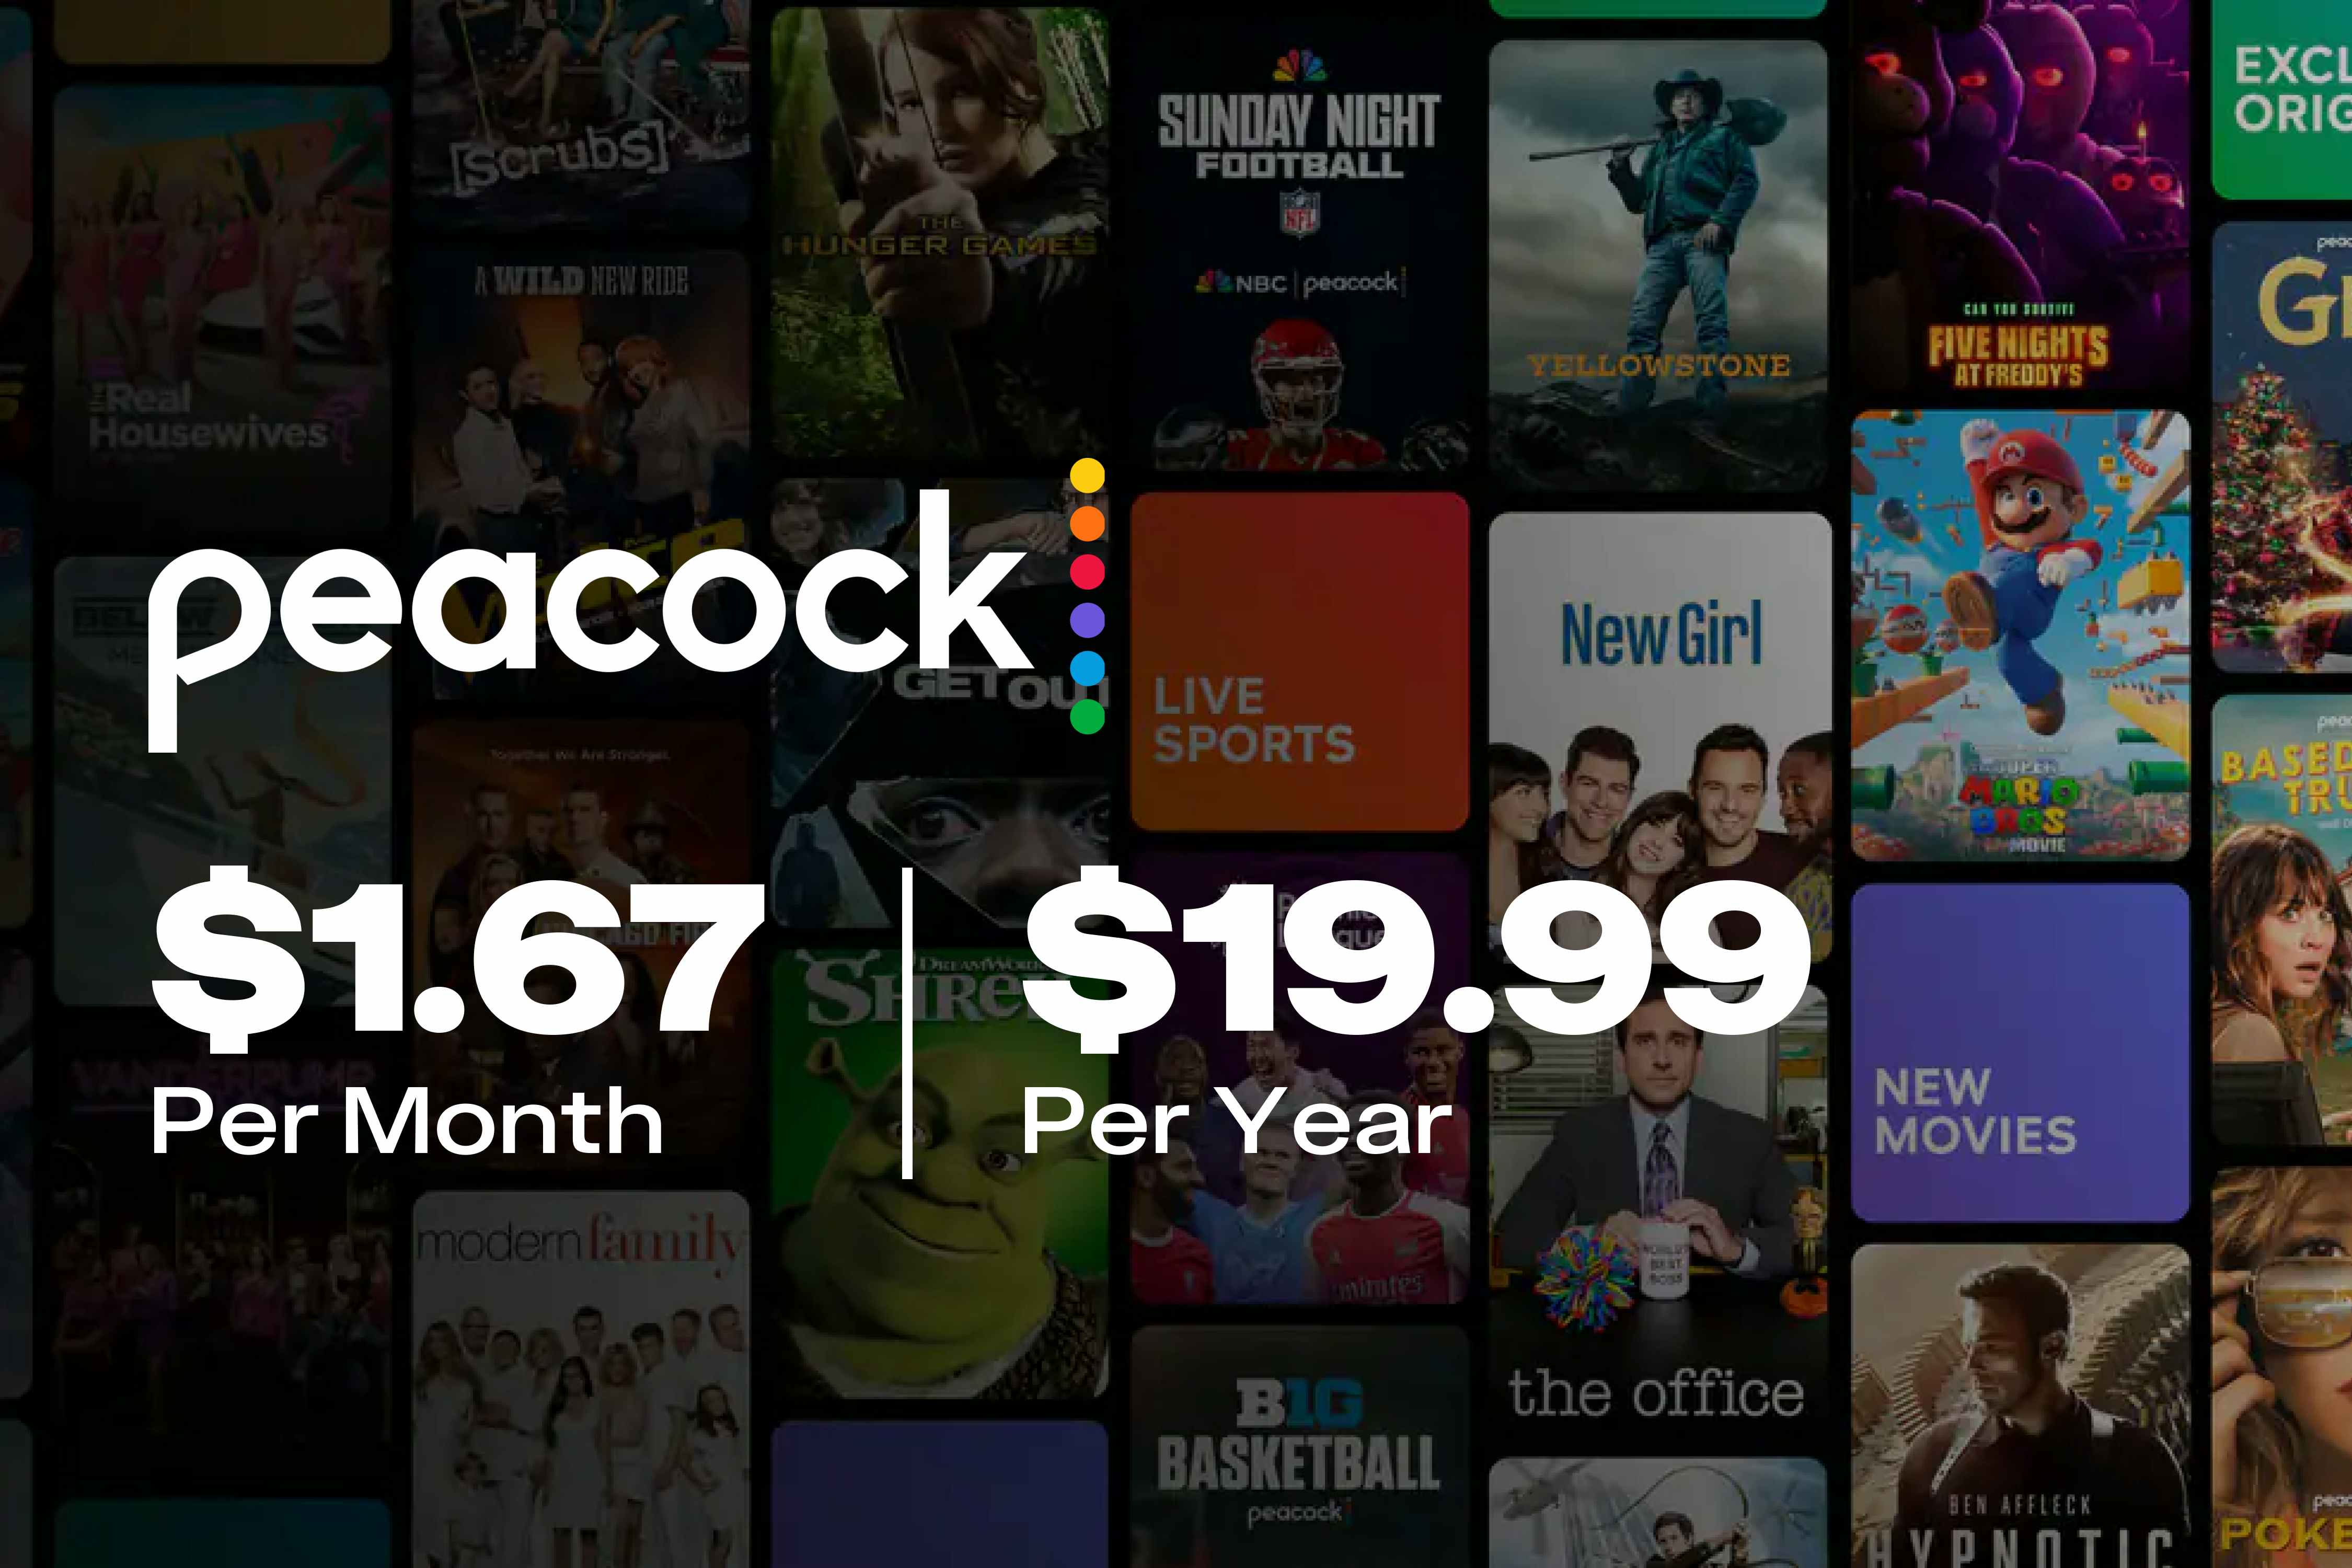 Whoa: You Can Get Peacock Premium for $1.67/Month With an Annual Sign-Up